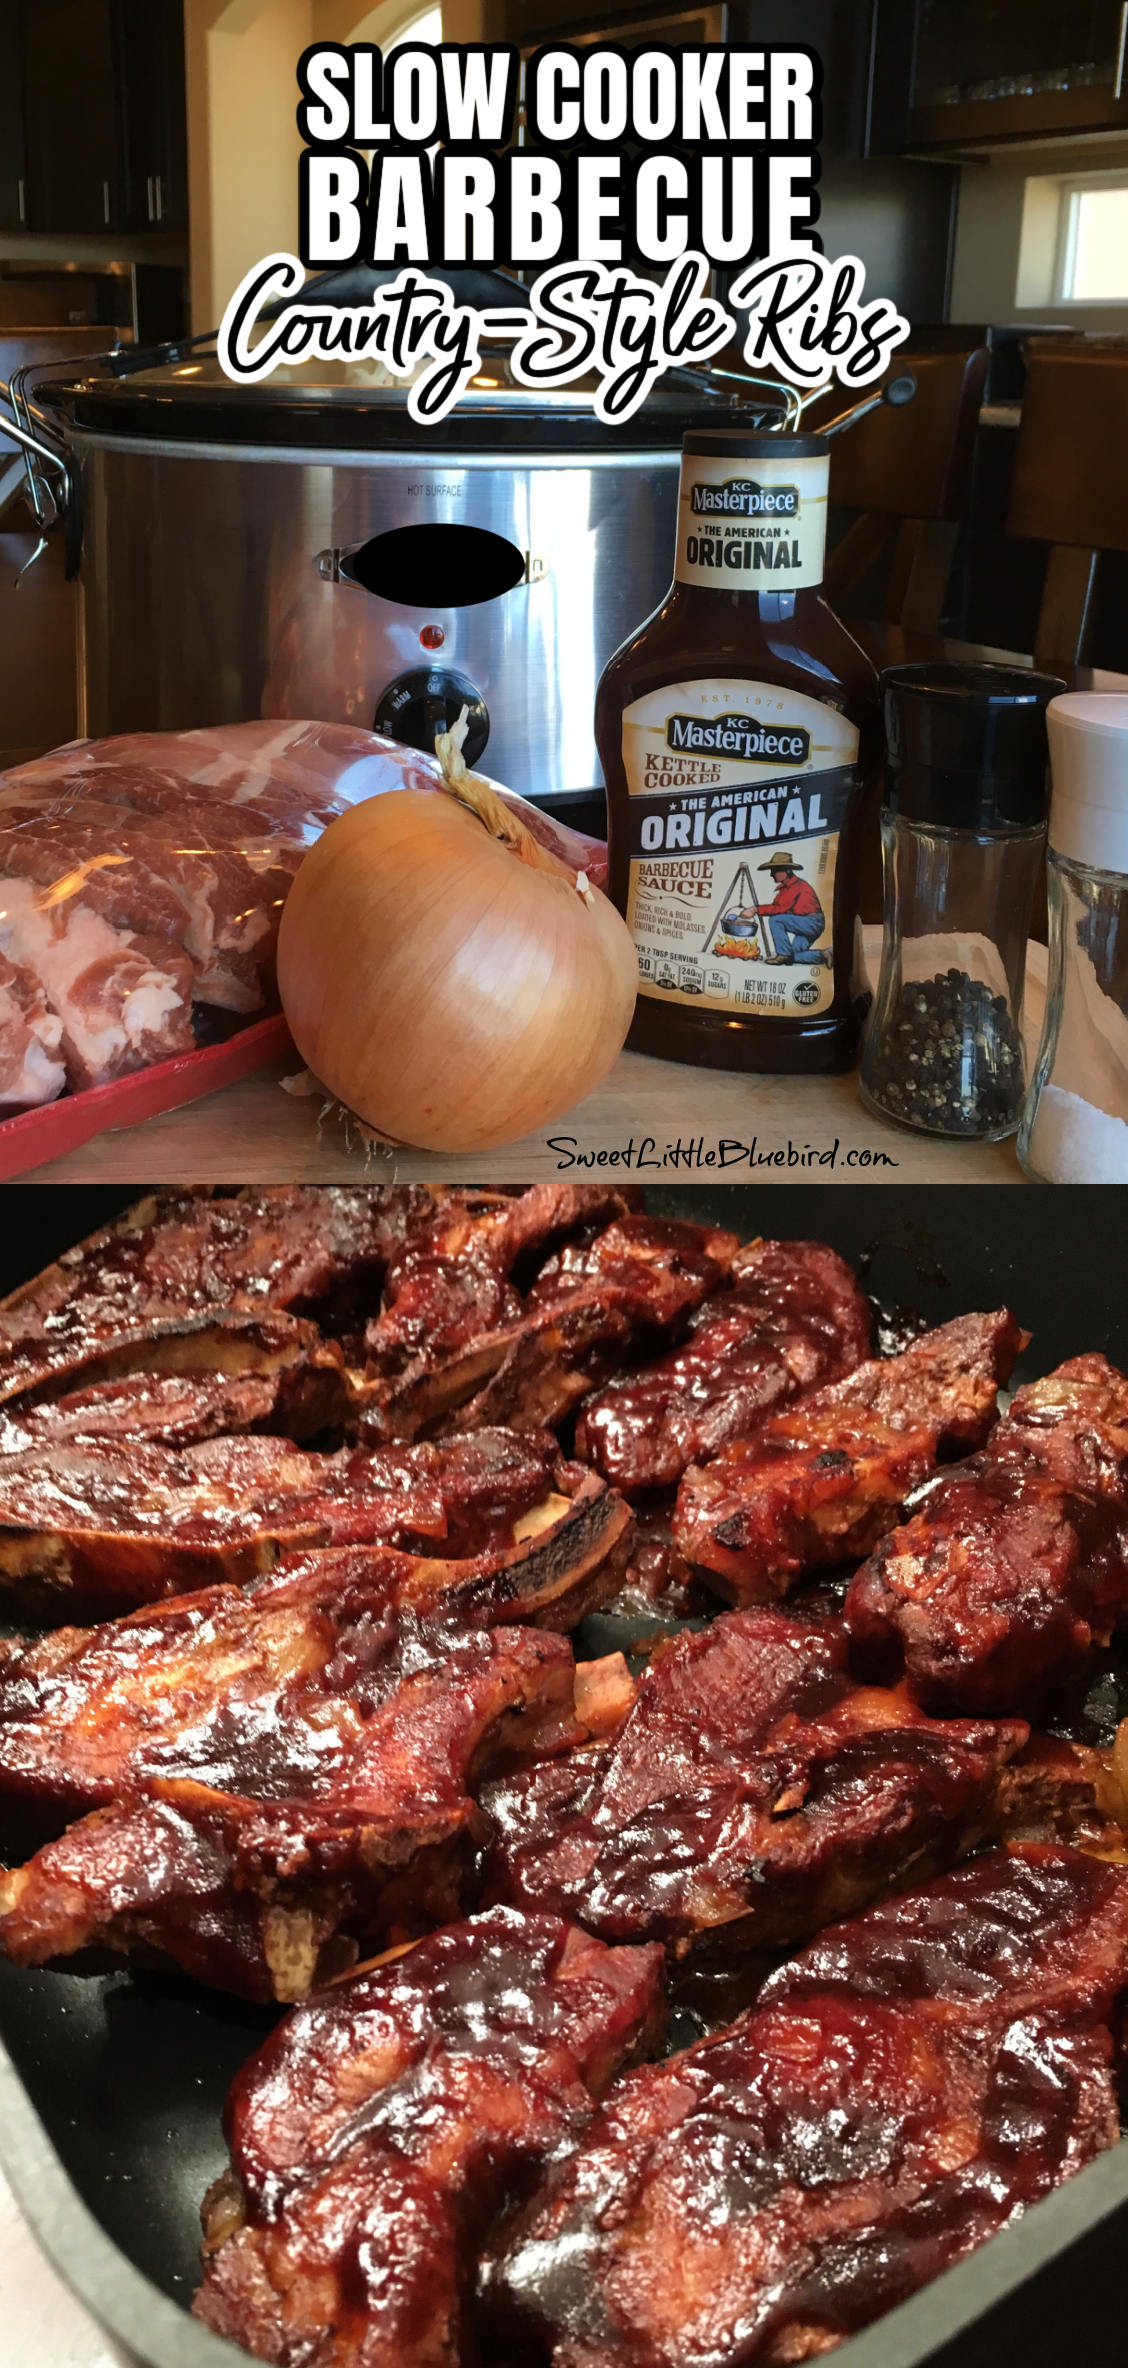 This is a 2 photo collage. The top picture shows the ingredients to make the ribs. The bottom photo shows the ribs in a pan, ready to serve. 